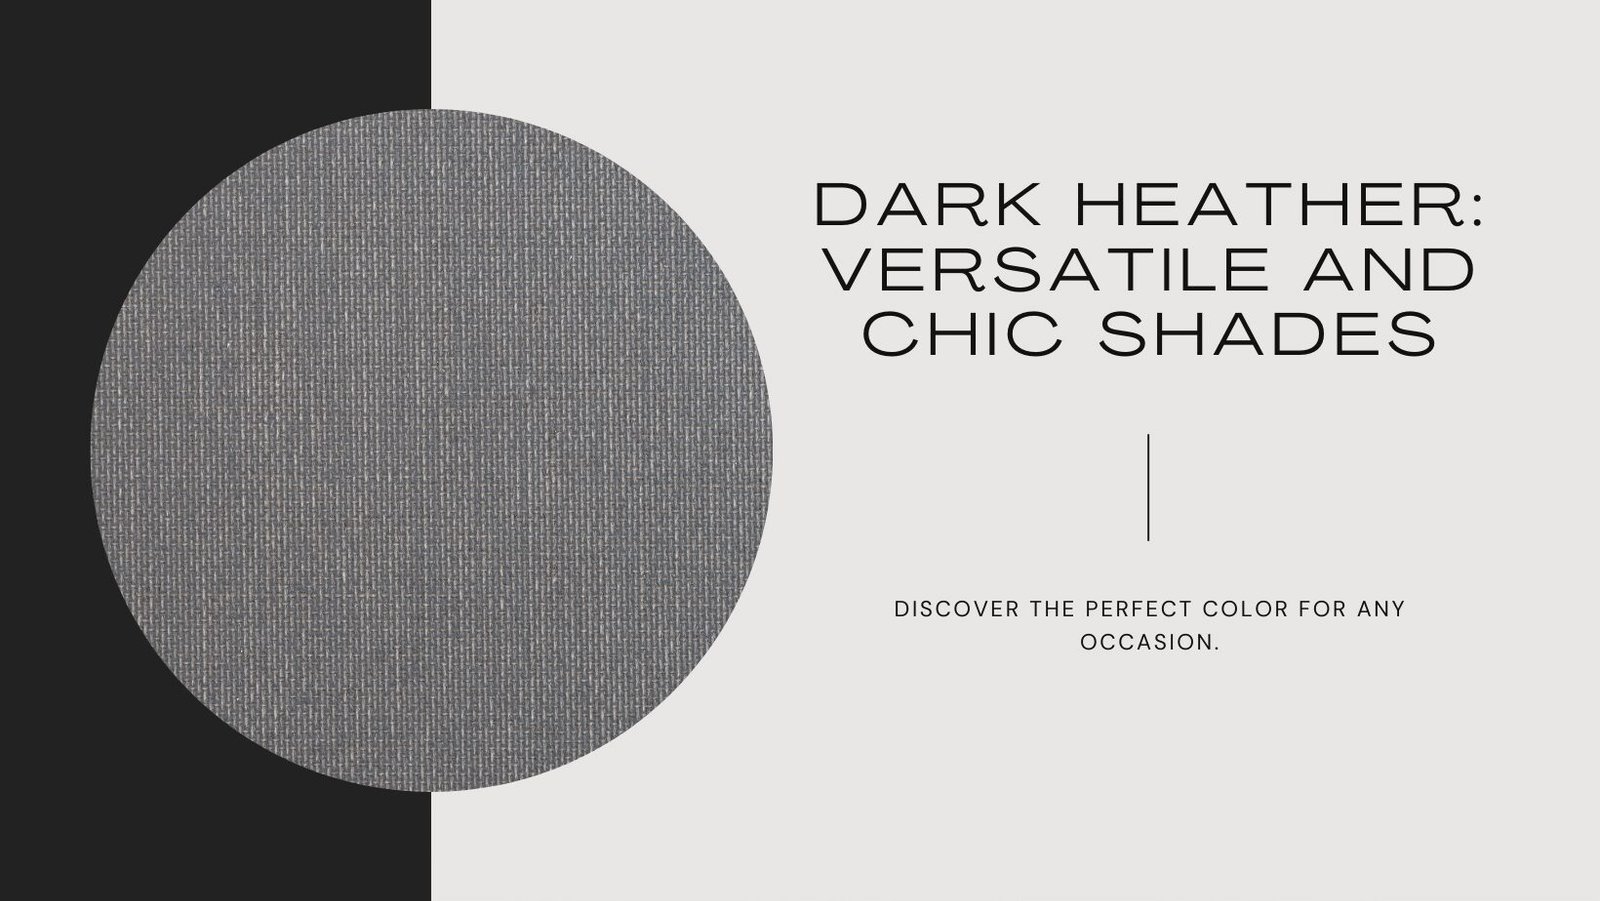 Exploring Dark Heather Color A Guide to Stylish and Versatile Shades